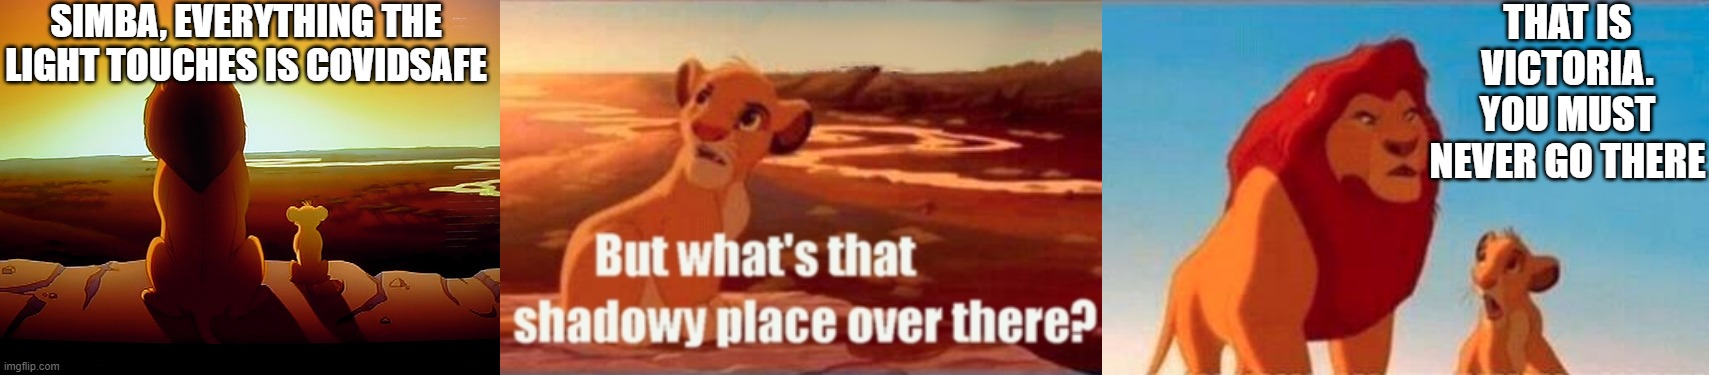 SIMBA, EVERYTHING THE LIGHT TOUCHES IS COVIDSAFE; THAT IS VICTORIA. YOU MUST NEVER GO THERE | image tagged in memes,lion king,simba shadowy place | made w/ Imgflip meme maker